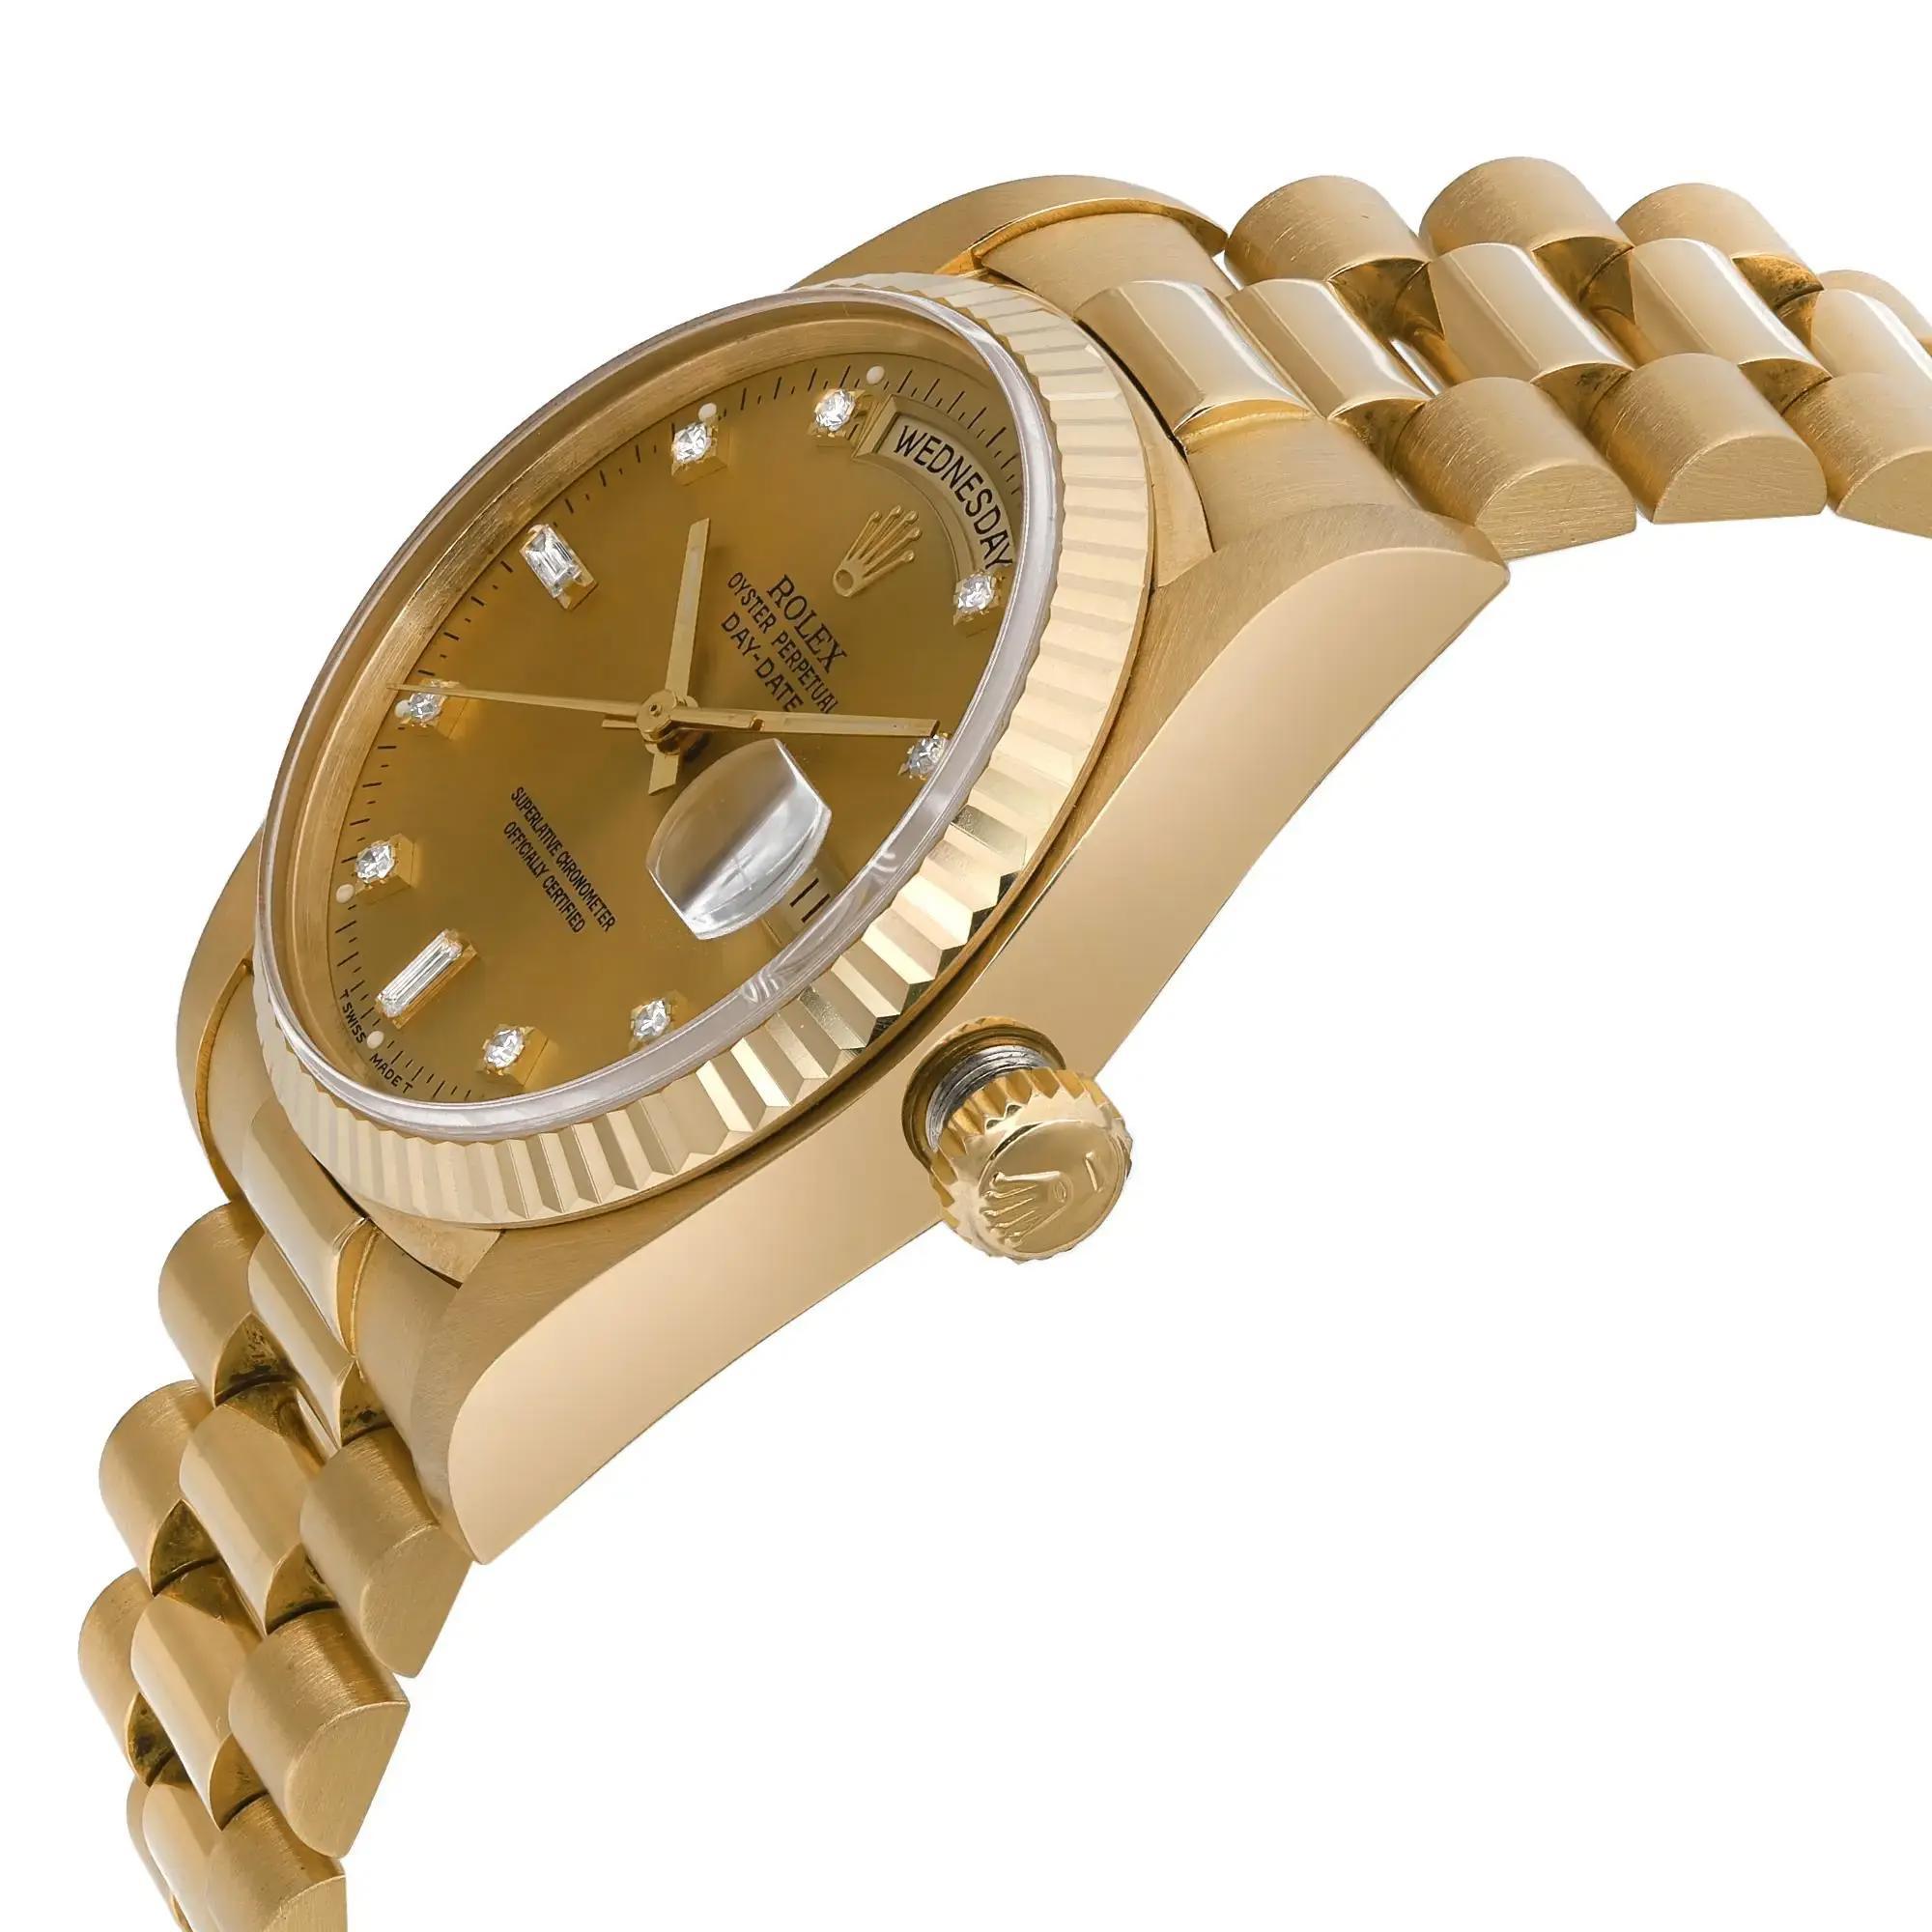 Rolex Day-Date 36mm 18K Gold Champagne Diamond Dial Automatic Mens Watch 18038A In Excellent Condition For Sale In New York, NY